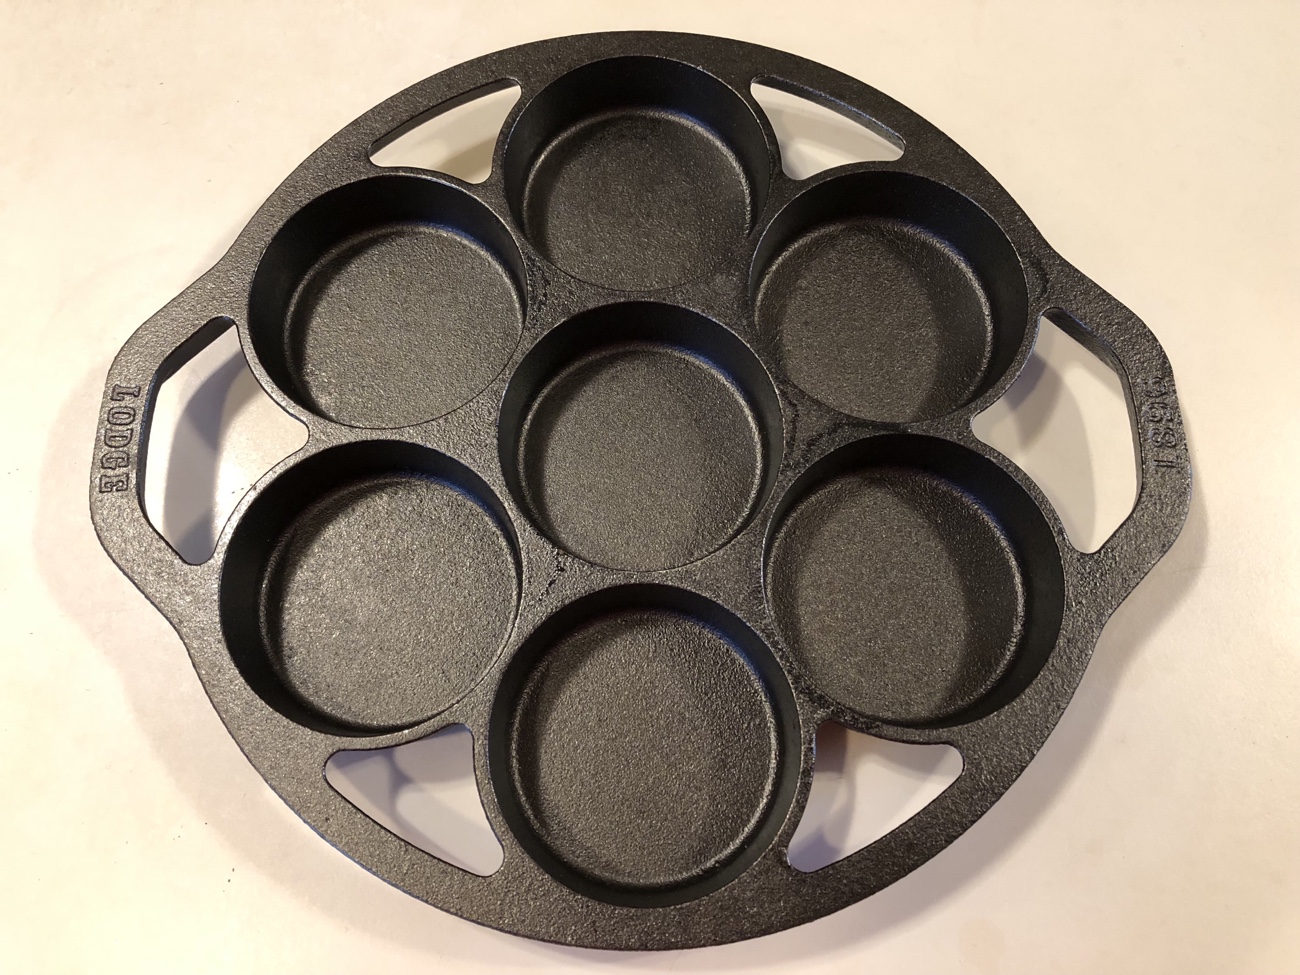 Lodge Cast Iron Biscuit Muffin Pan 7 Slot 7B2 USA